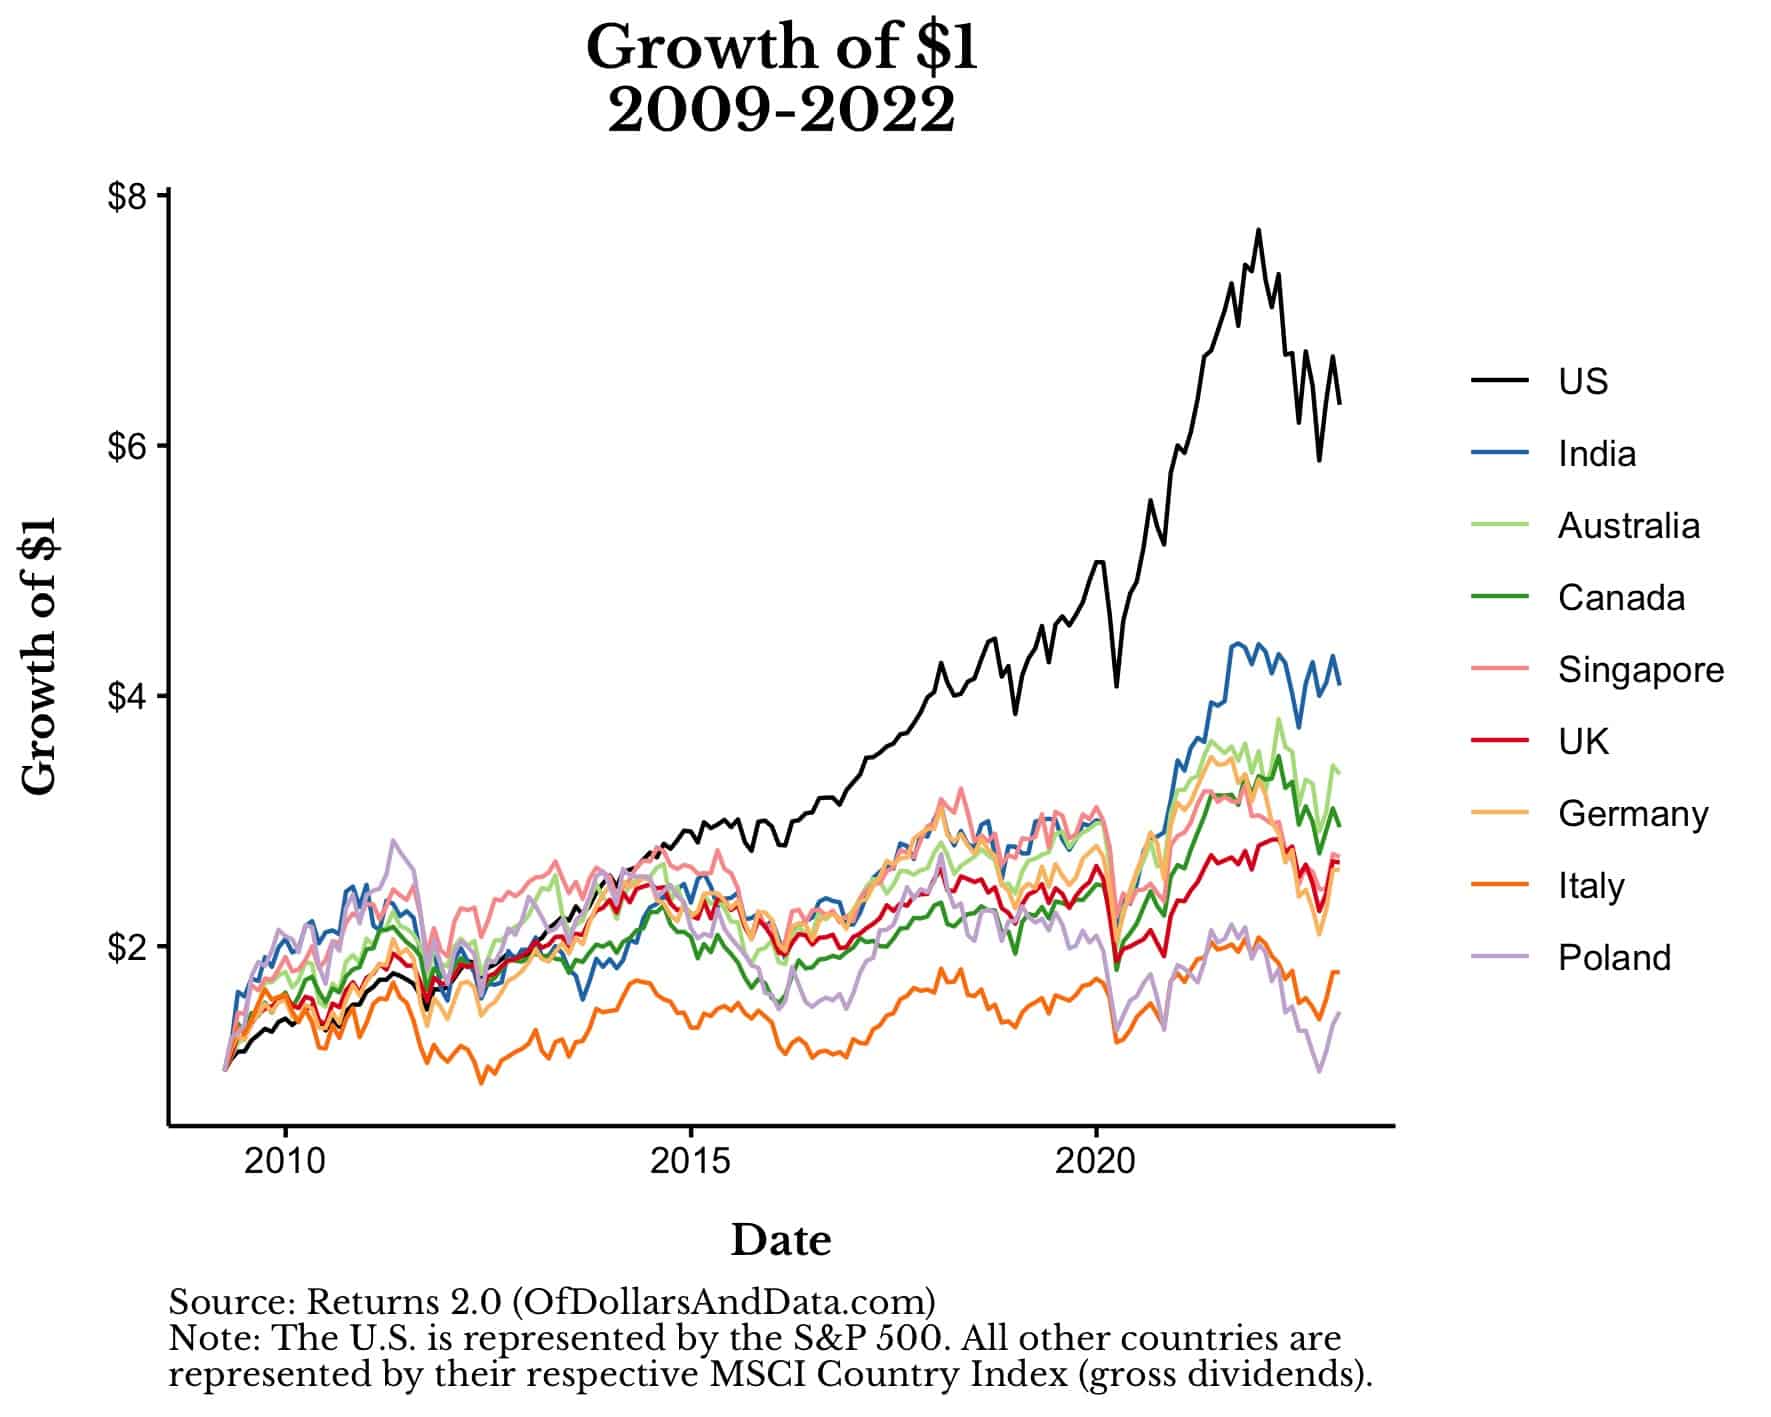 Chart showing growth of $1 from March 2009 to 2022 for international stocks from 9 different markets around the globe.